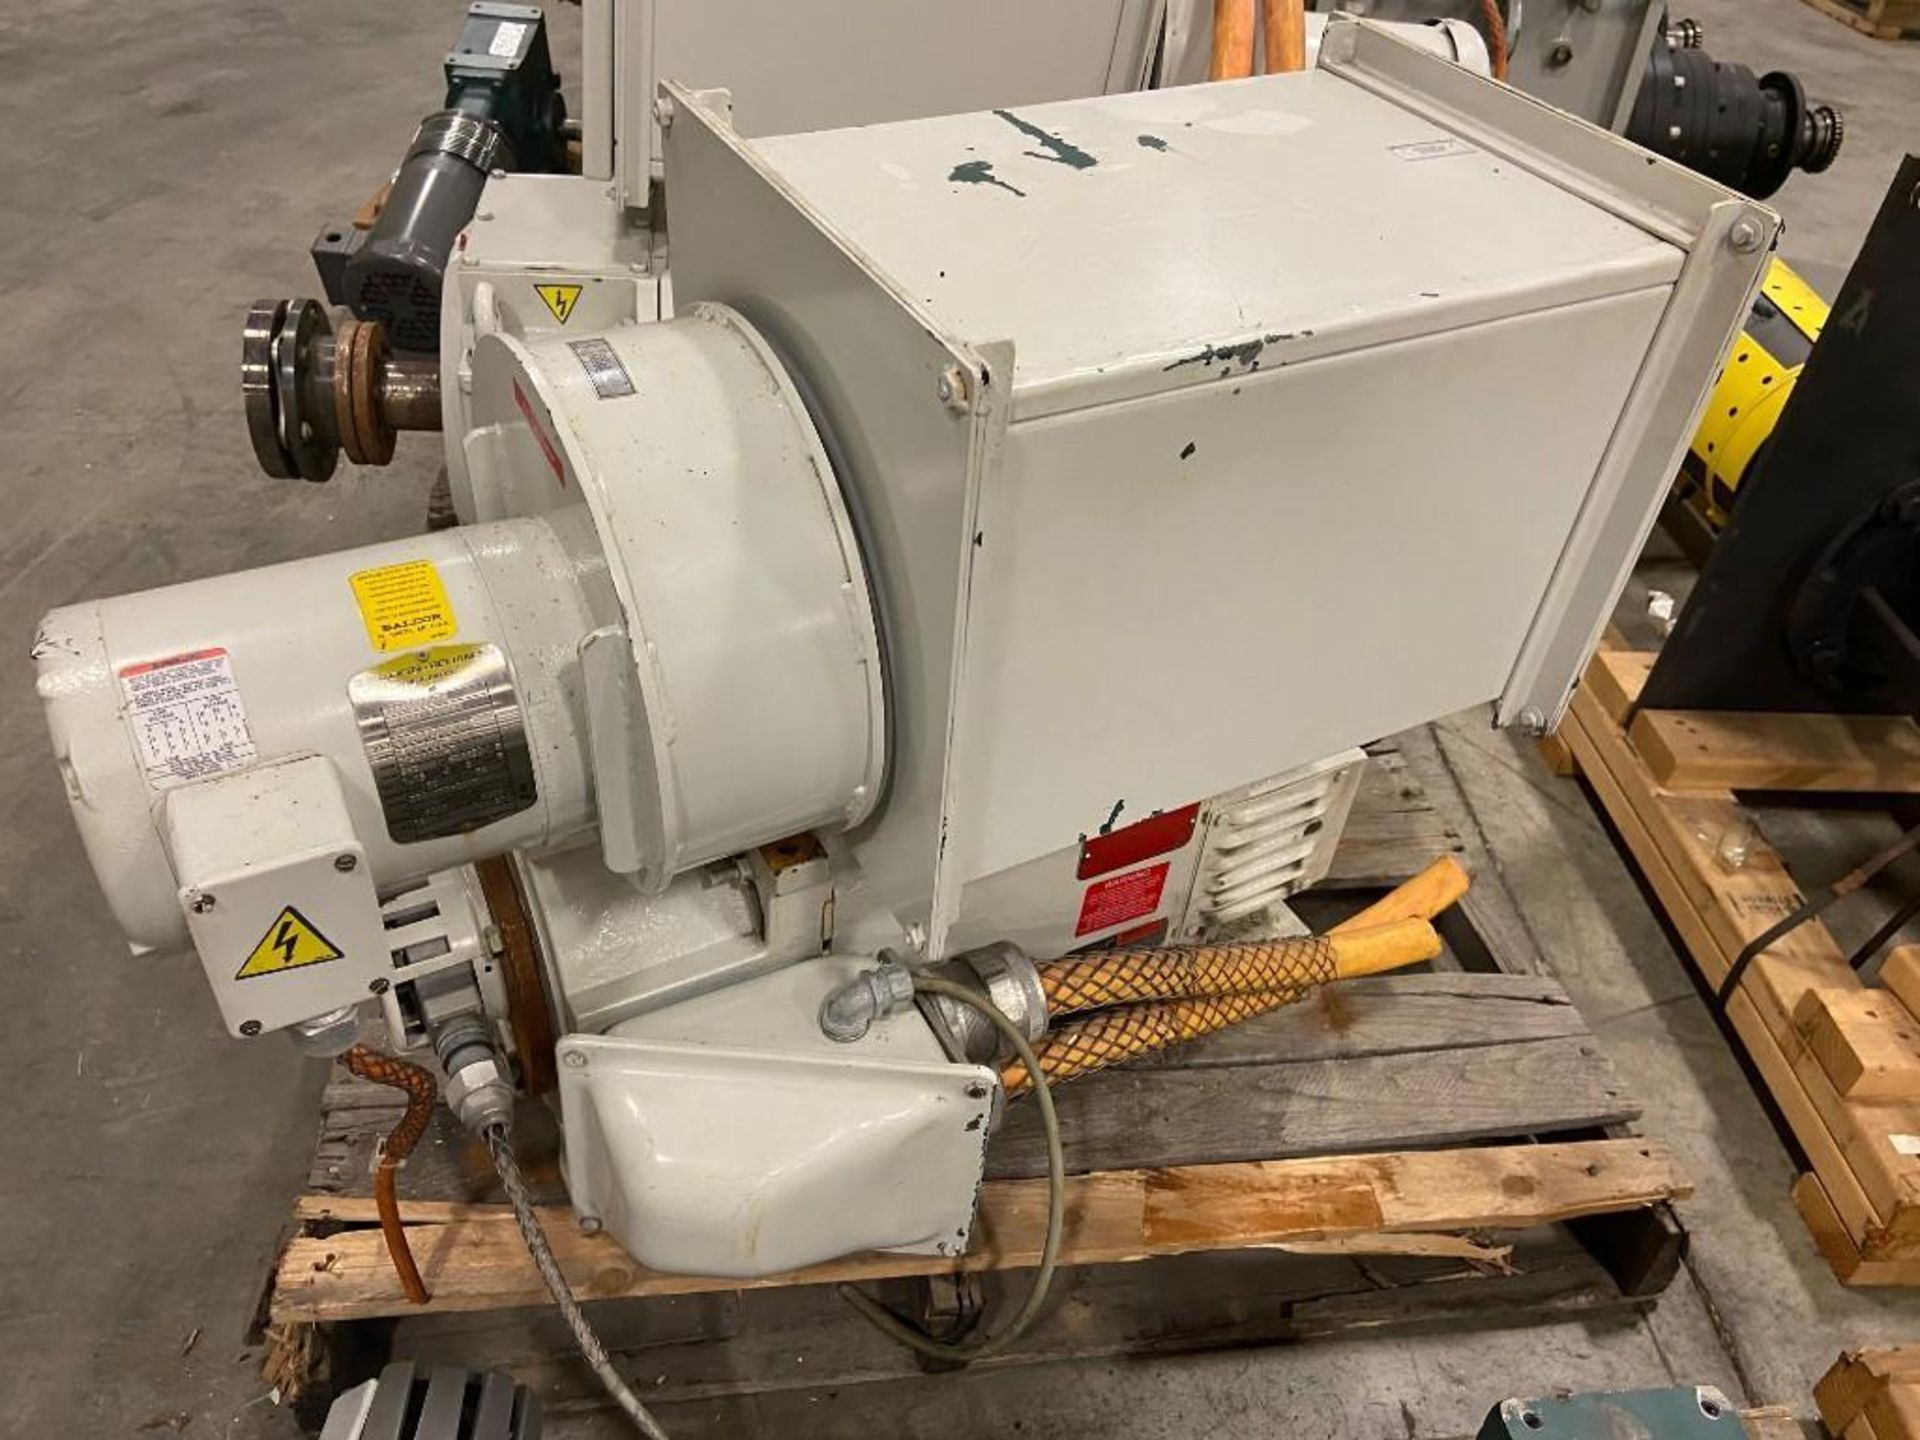 Baldor/Reliance/Unico 114 HP AC Electric Motor with Air Cooling and Encoder - Rigging Fee= $50 - Image 2 of 4